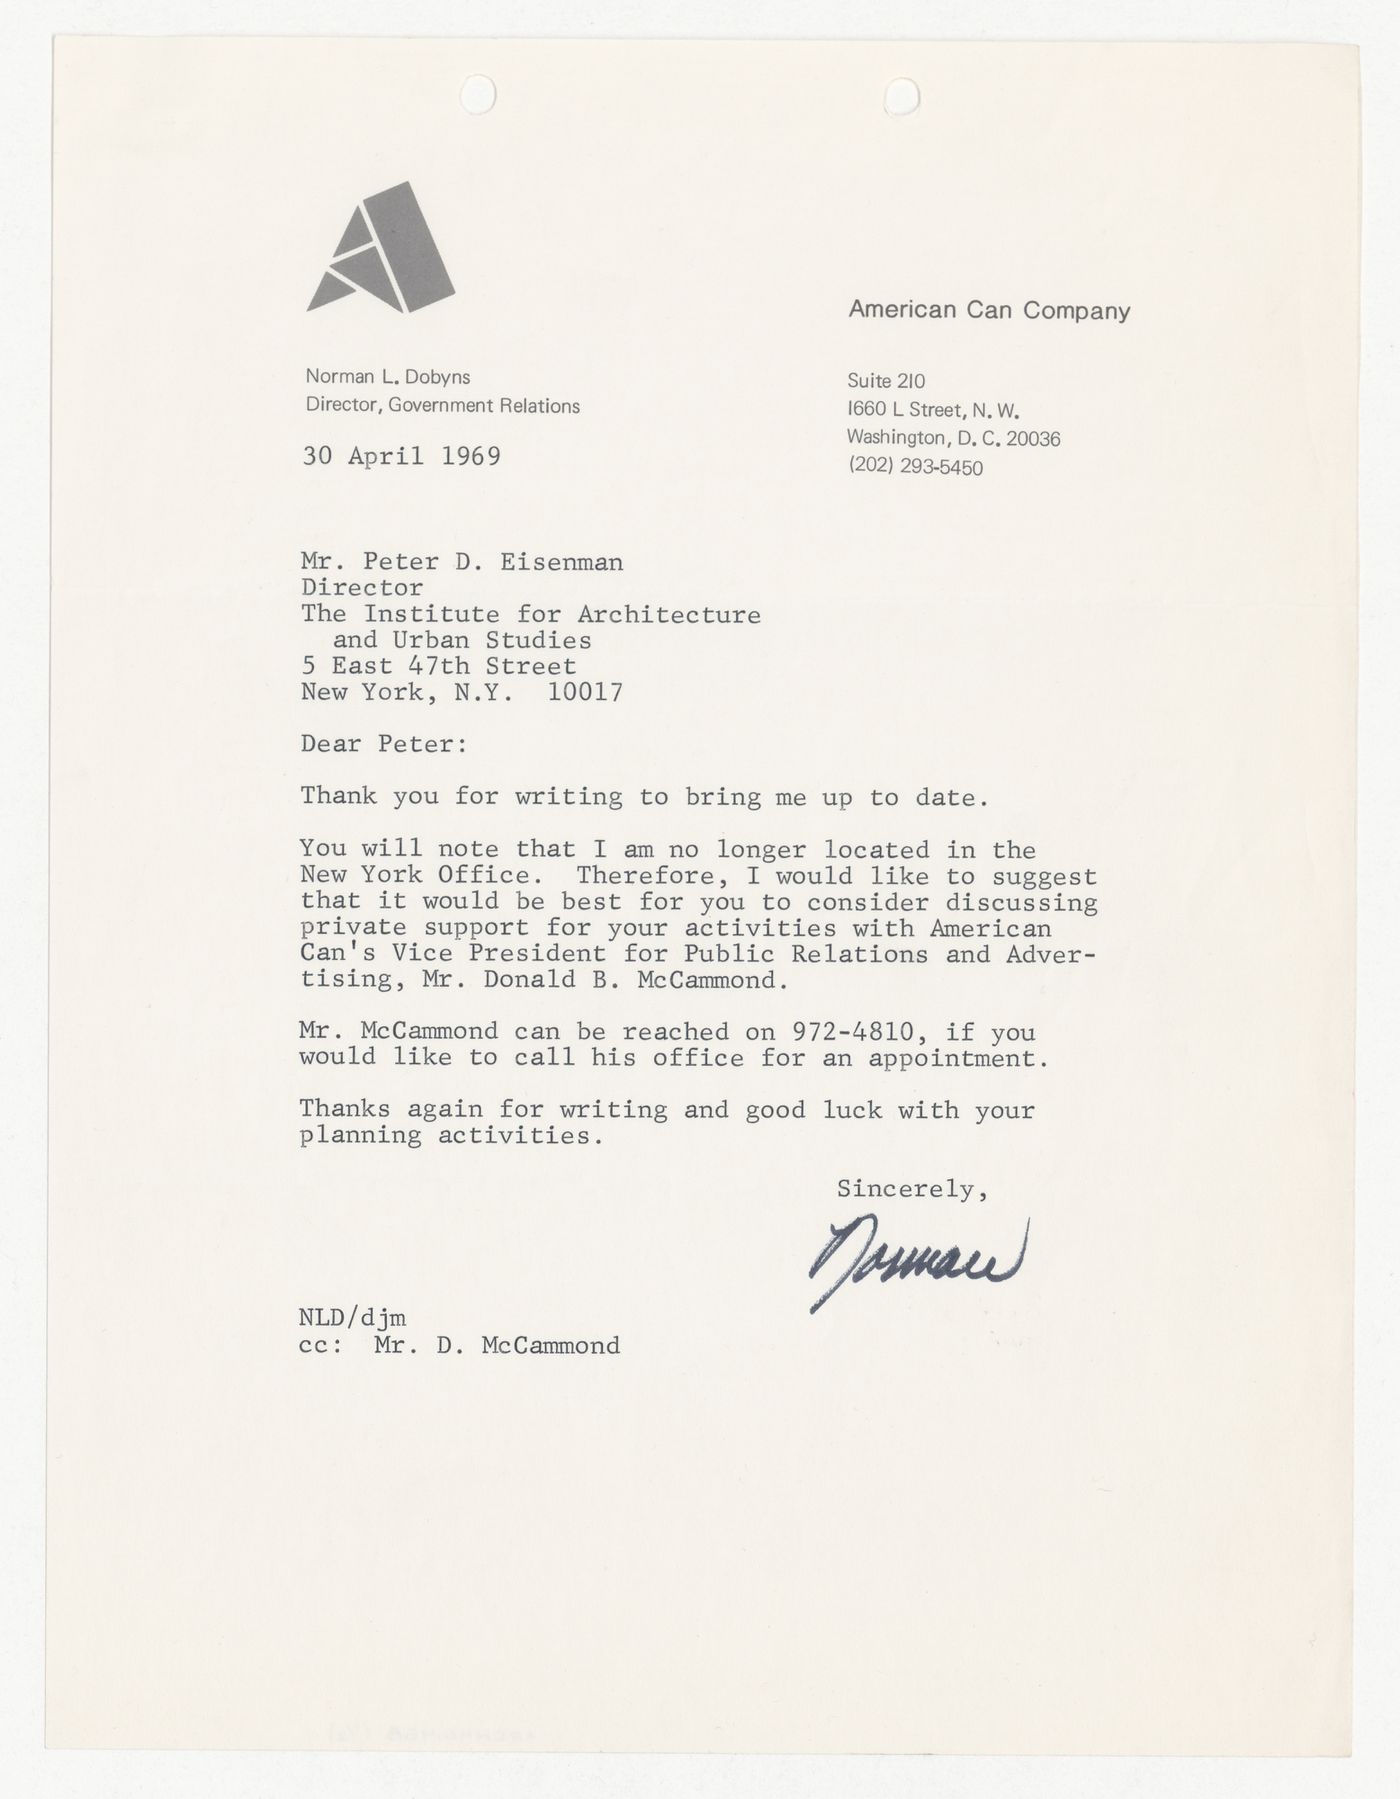 Letter from Norman L. Dobyns to Peter D. Eisenman responding to a donation request made by Eisenman with attached copy of original letter